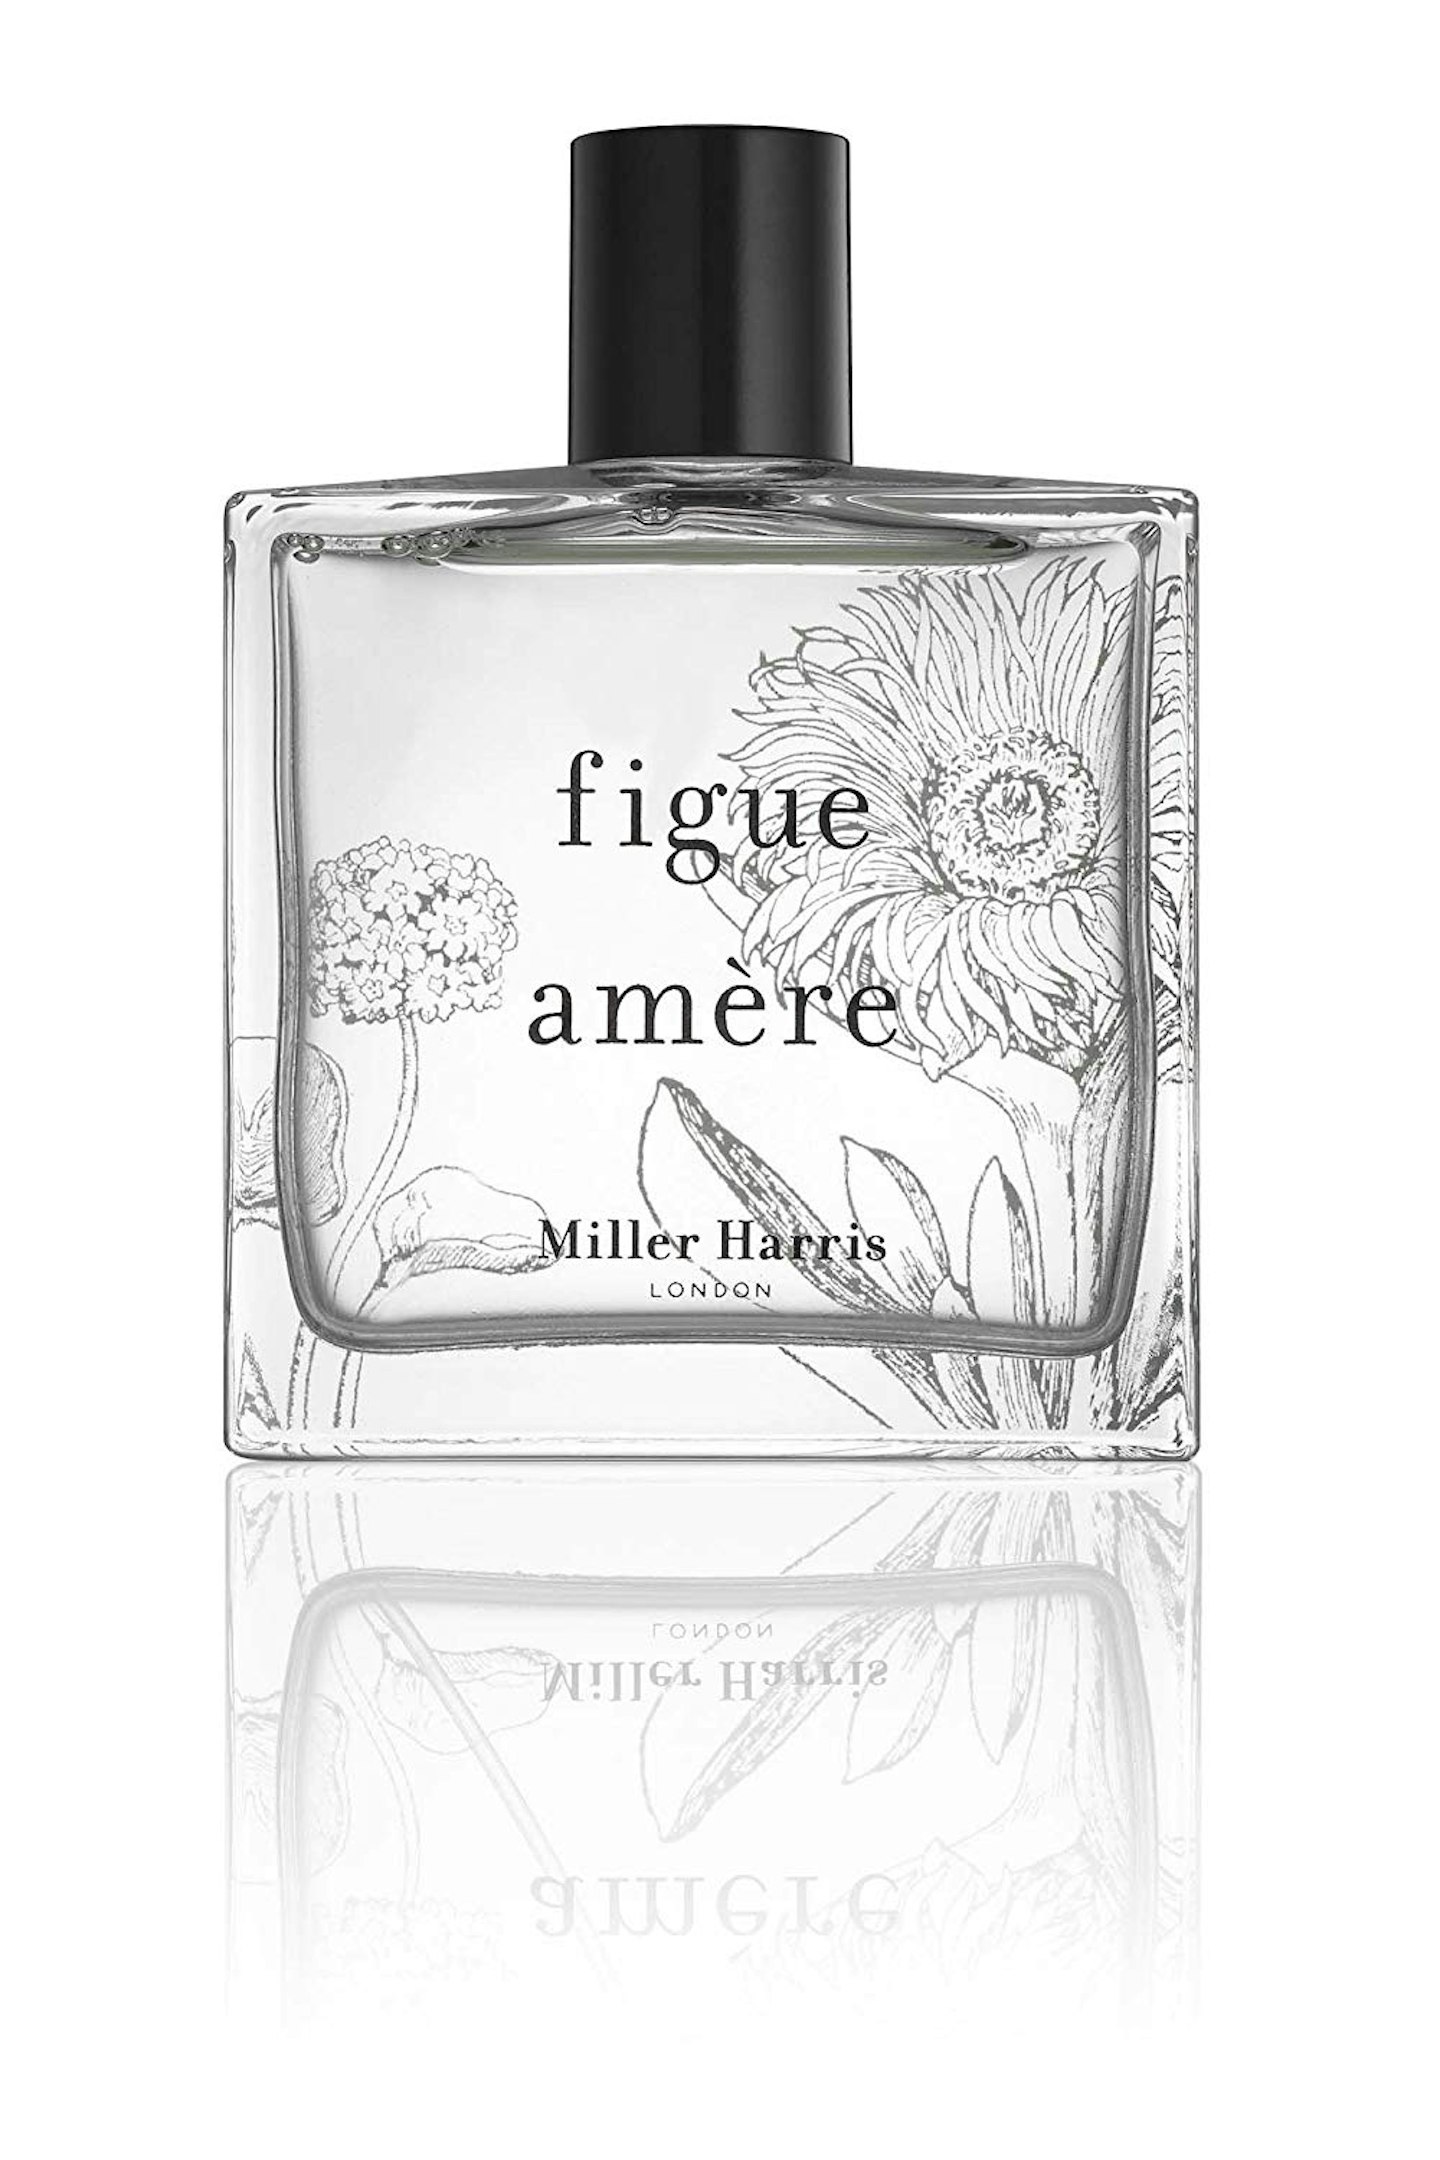 Miller Harris Limited Edition Figue Amere EDP £75 for 50ml